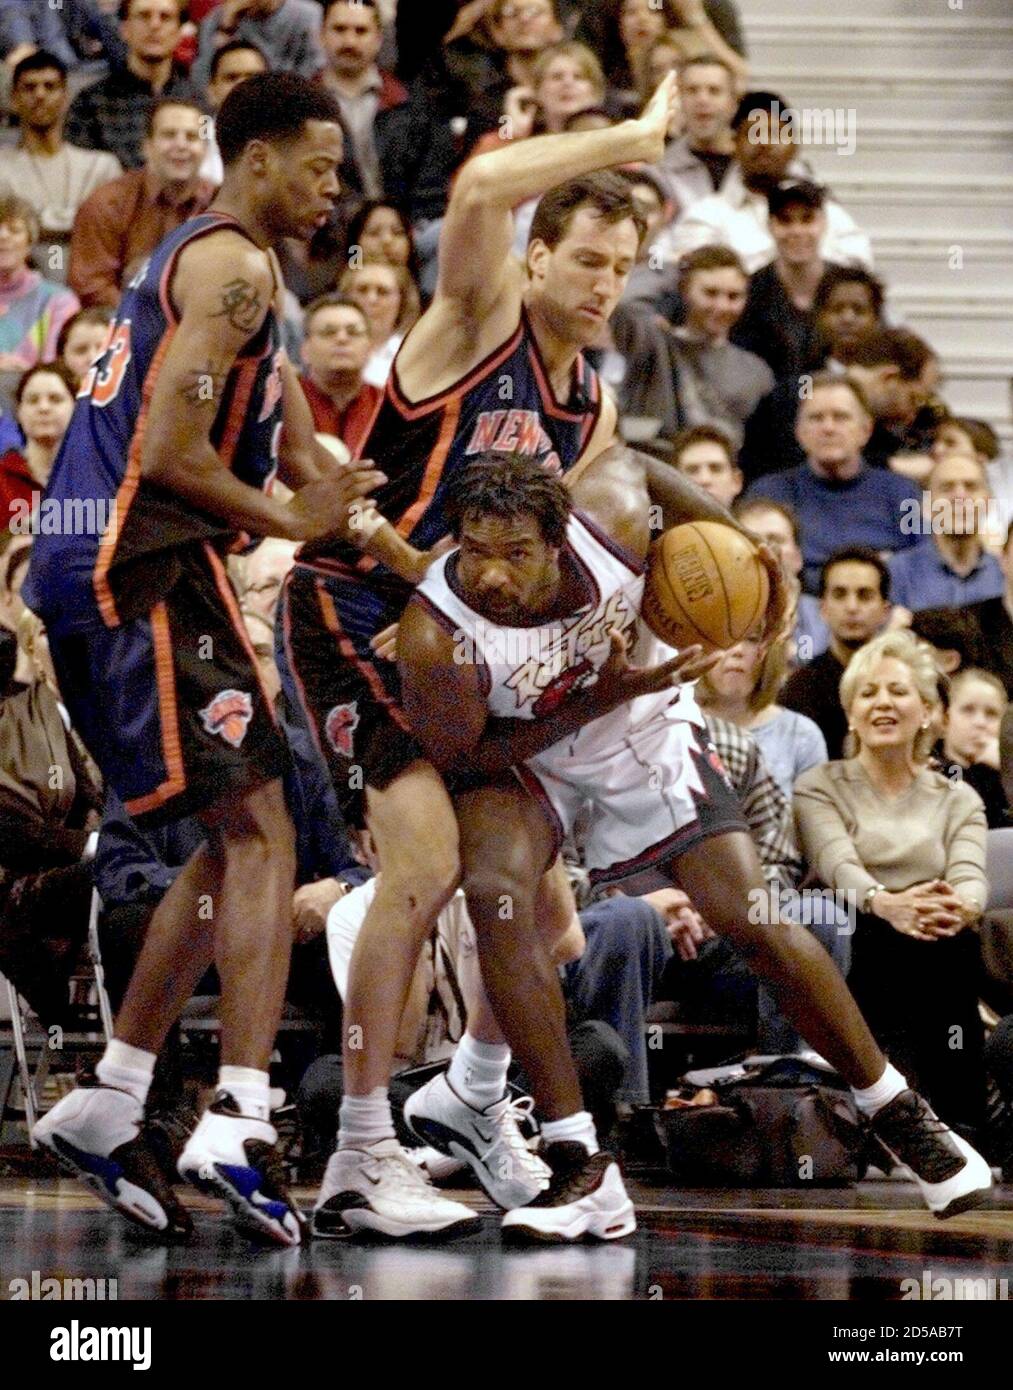 Toronto Raptors forward Charles Oakley (R) fights for position under the  basket against New York Knicks forward Marcus Camby (L) and center Chris  Dudley during first half NBA action at the Air